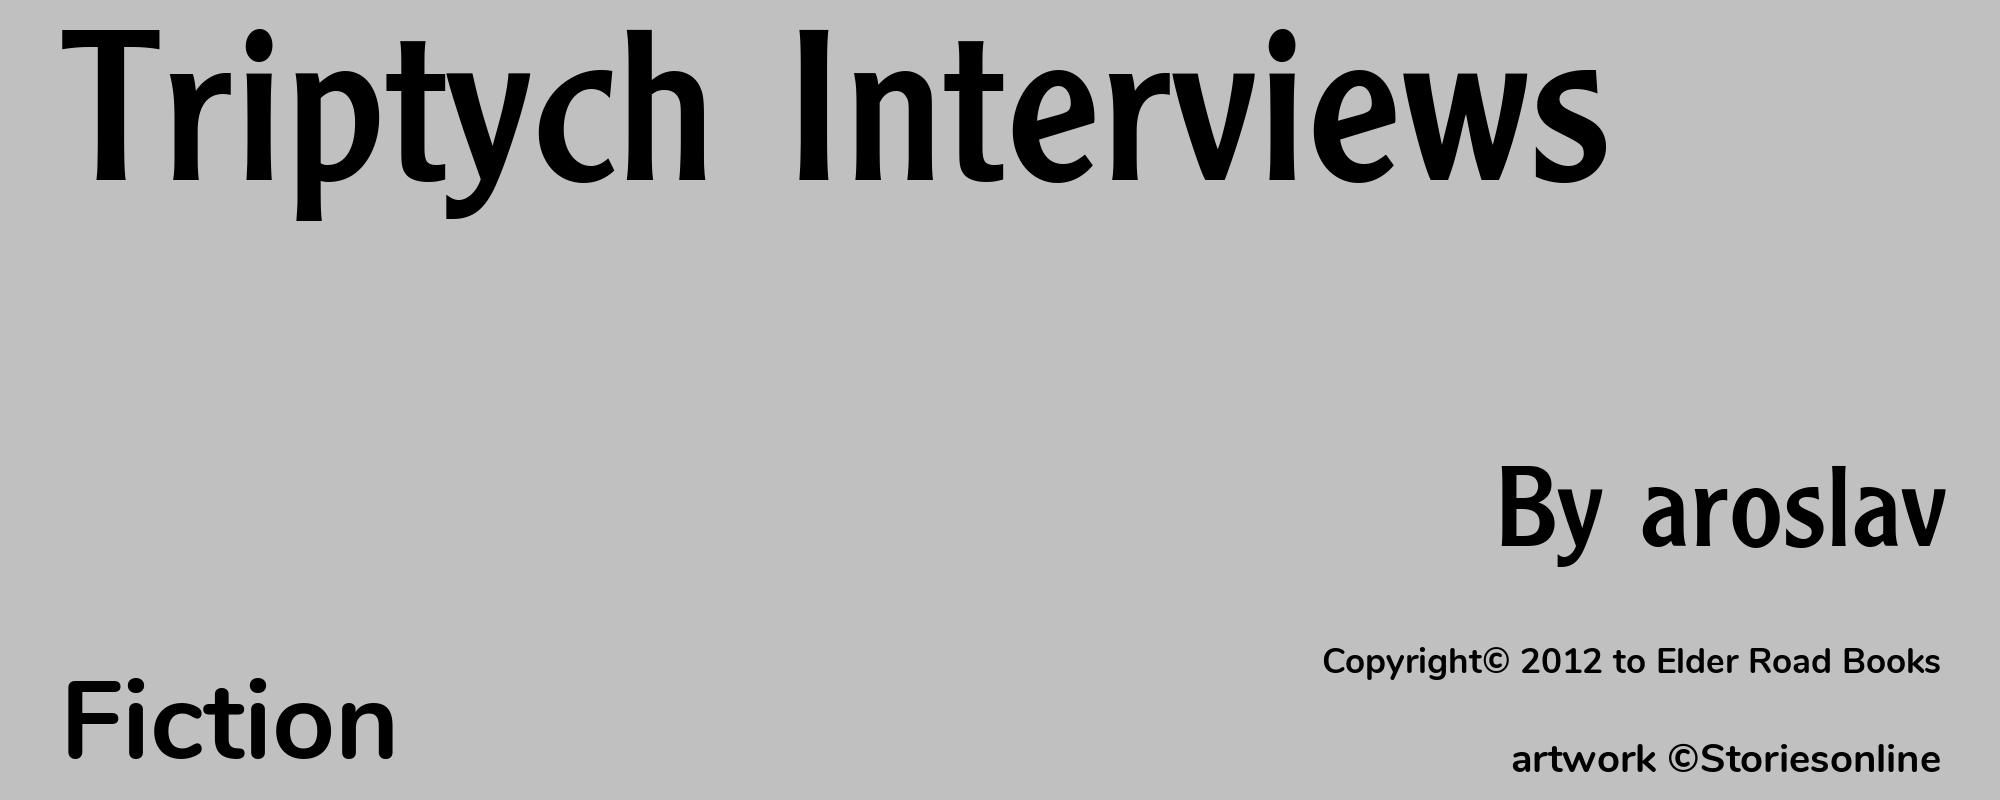 Triptych Interviews - Cover